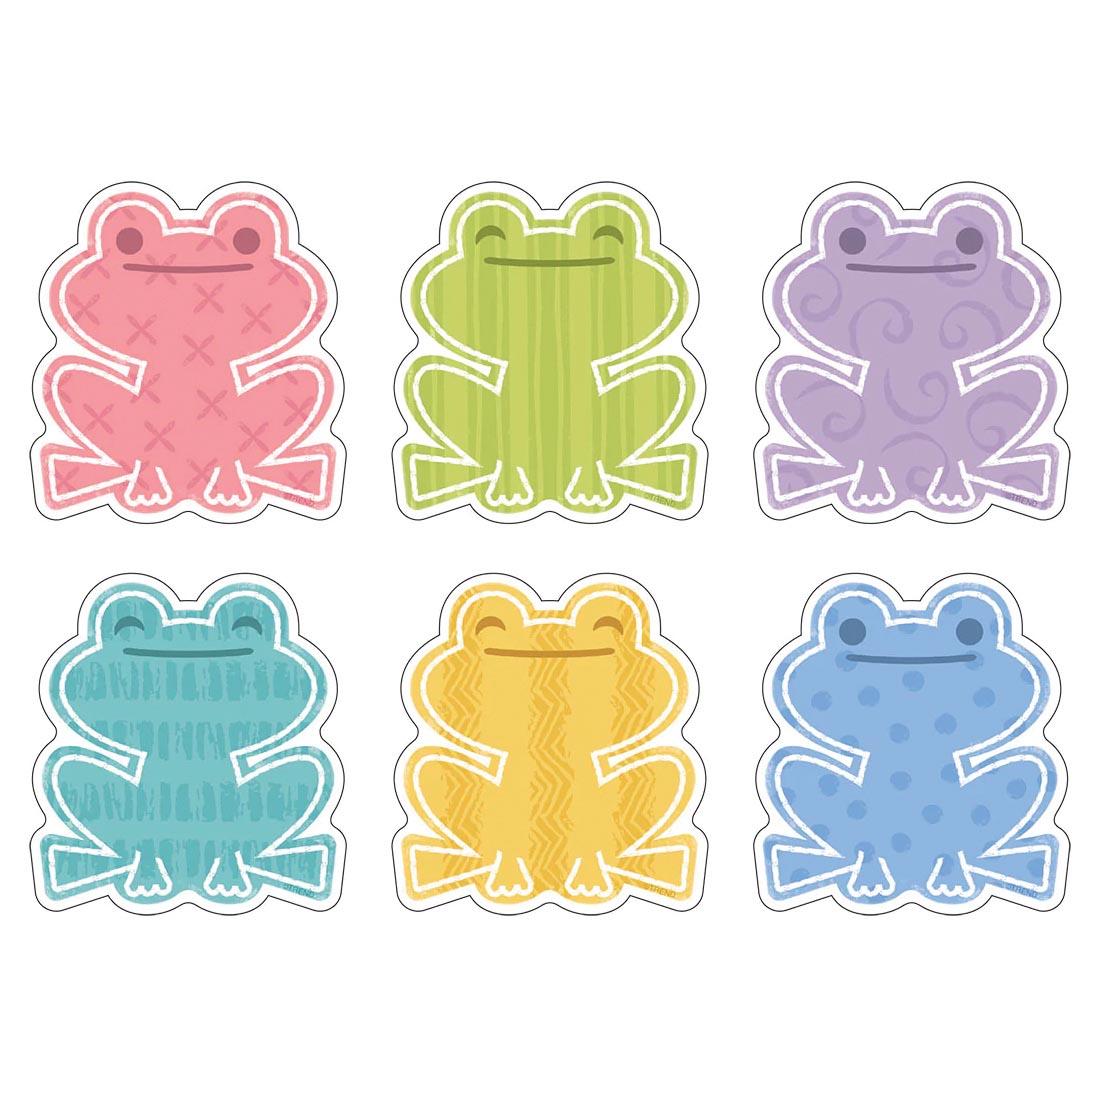 Six Garden Frogs Mini Accents from the Good To Grow collection by TREND